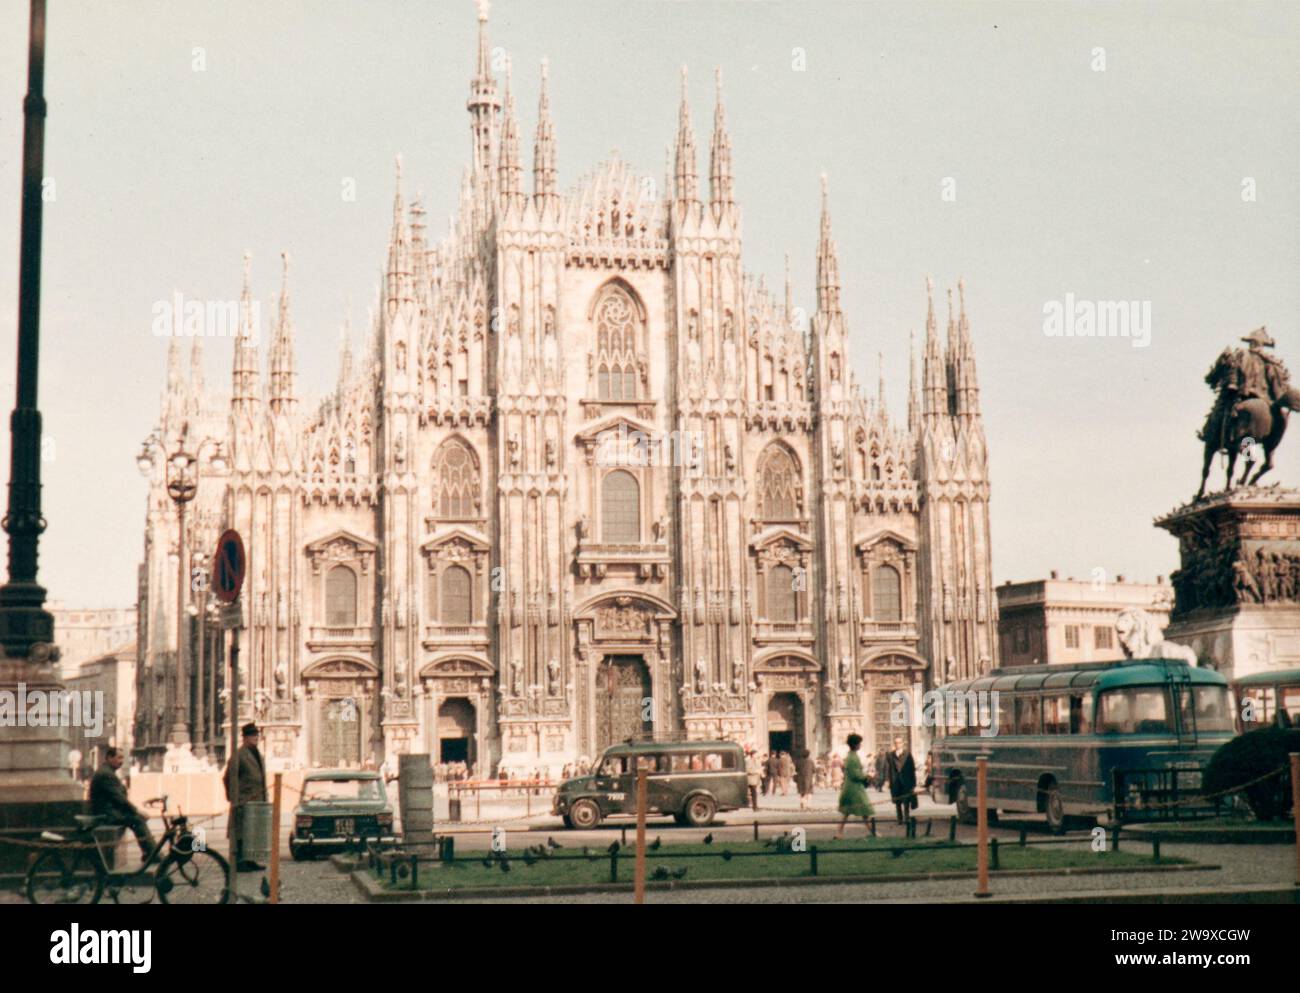 The iconic cathedral of Milan, the Duomo, in a photo taken in mid sixties. Stock Photo